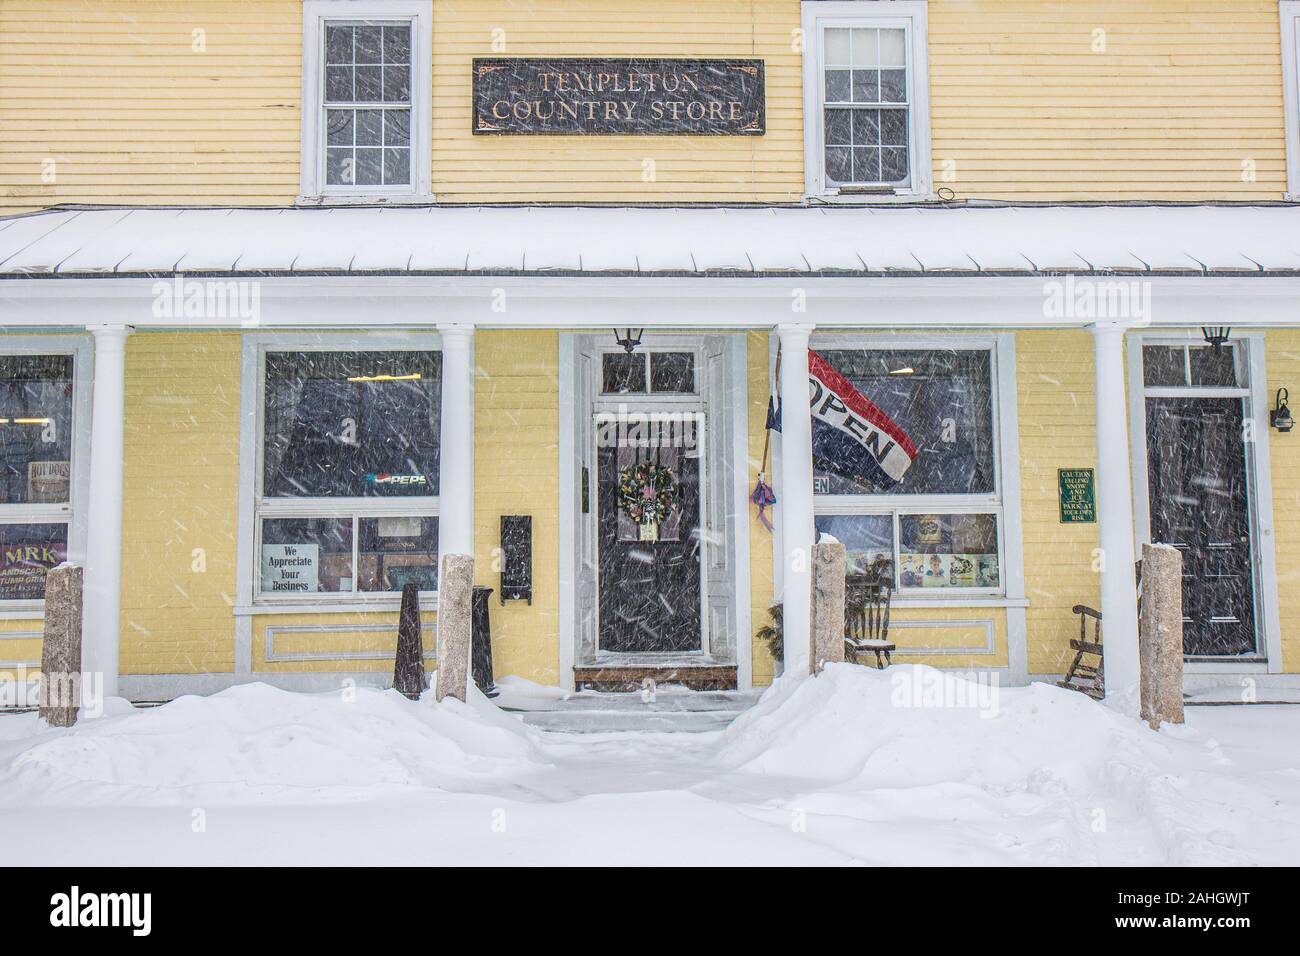 Le Templeton Country Store, Templeton, MA Banque D'Images